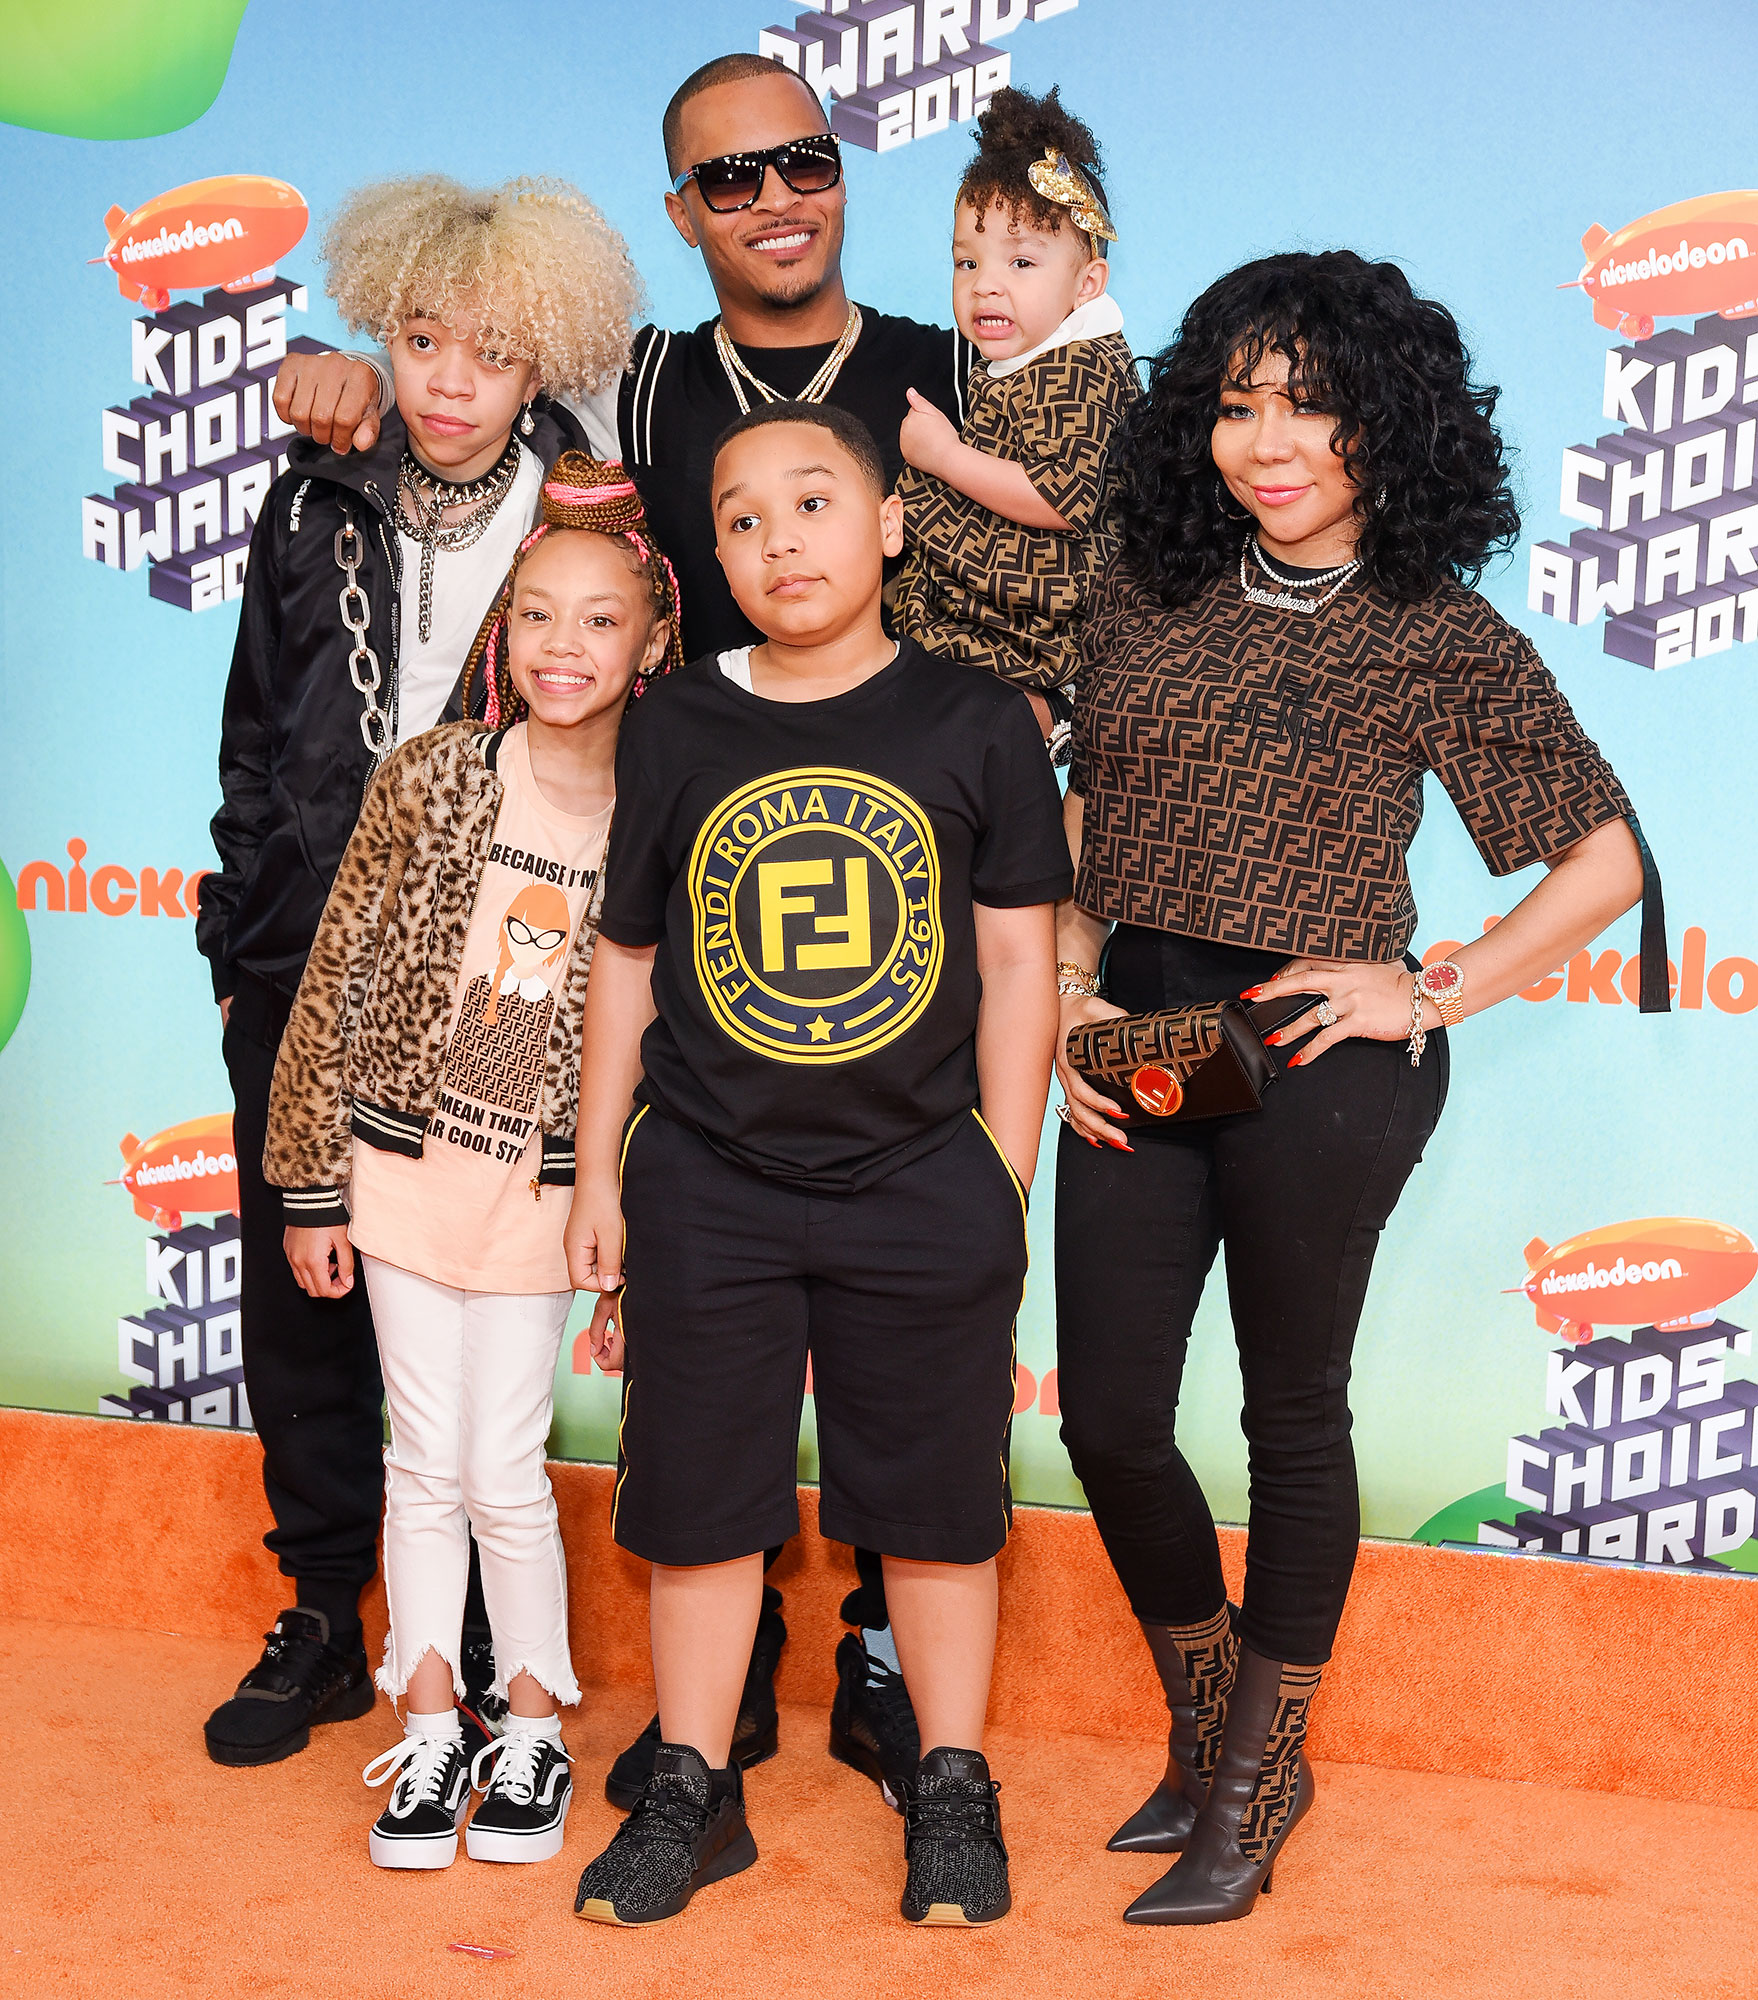 Meet the  Family Behind the Kids Diana Show Channel